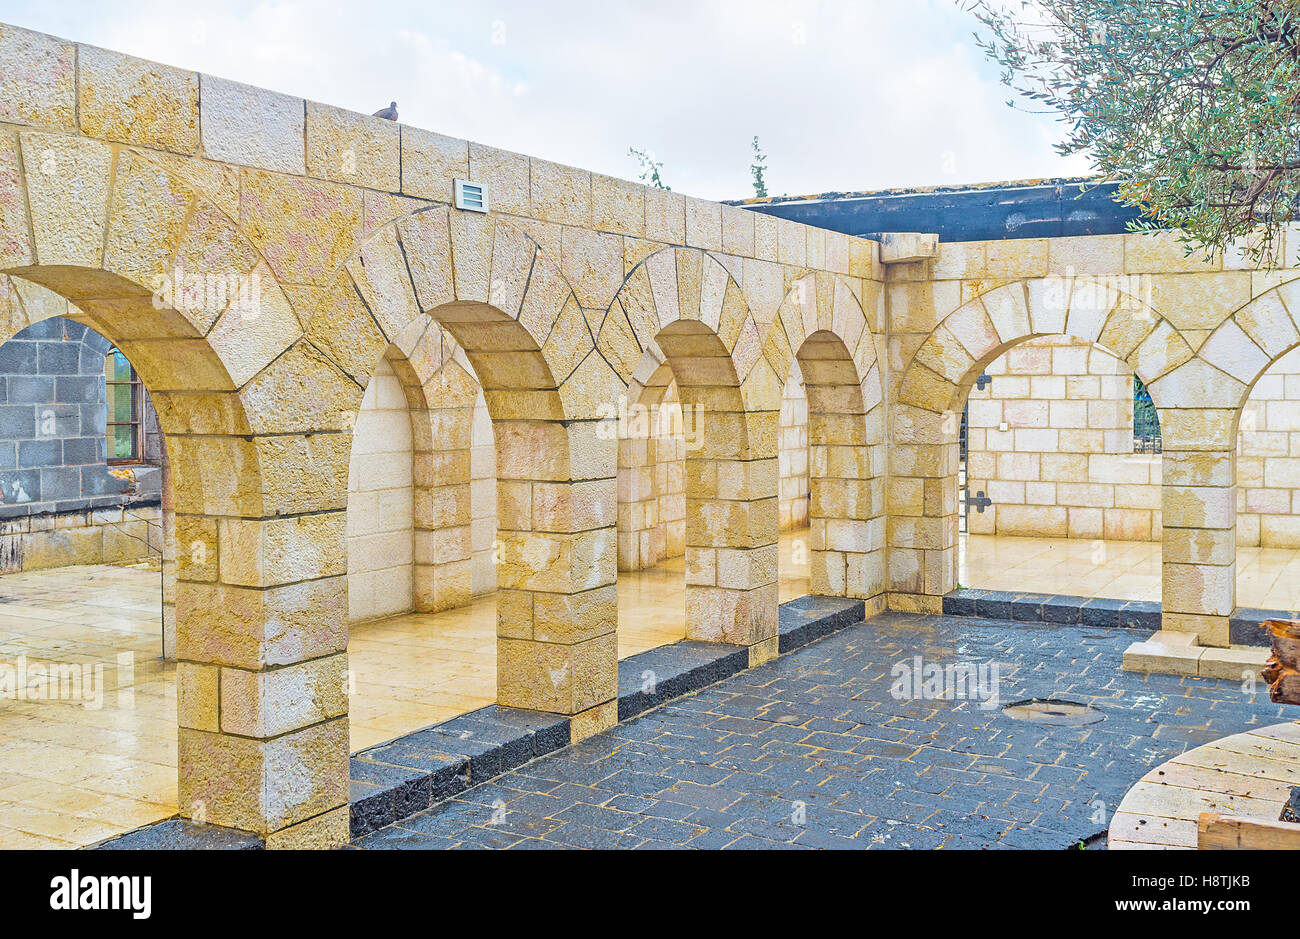 The courtyard of the Multiplication Church with the numerous stone arches Stock Photo